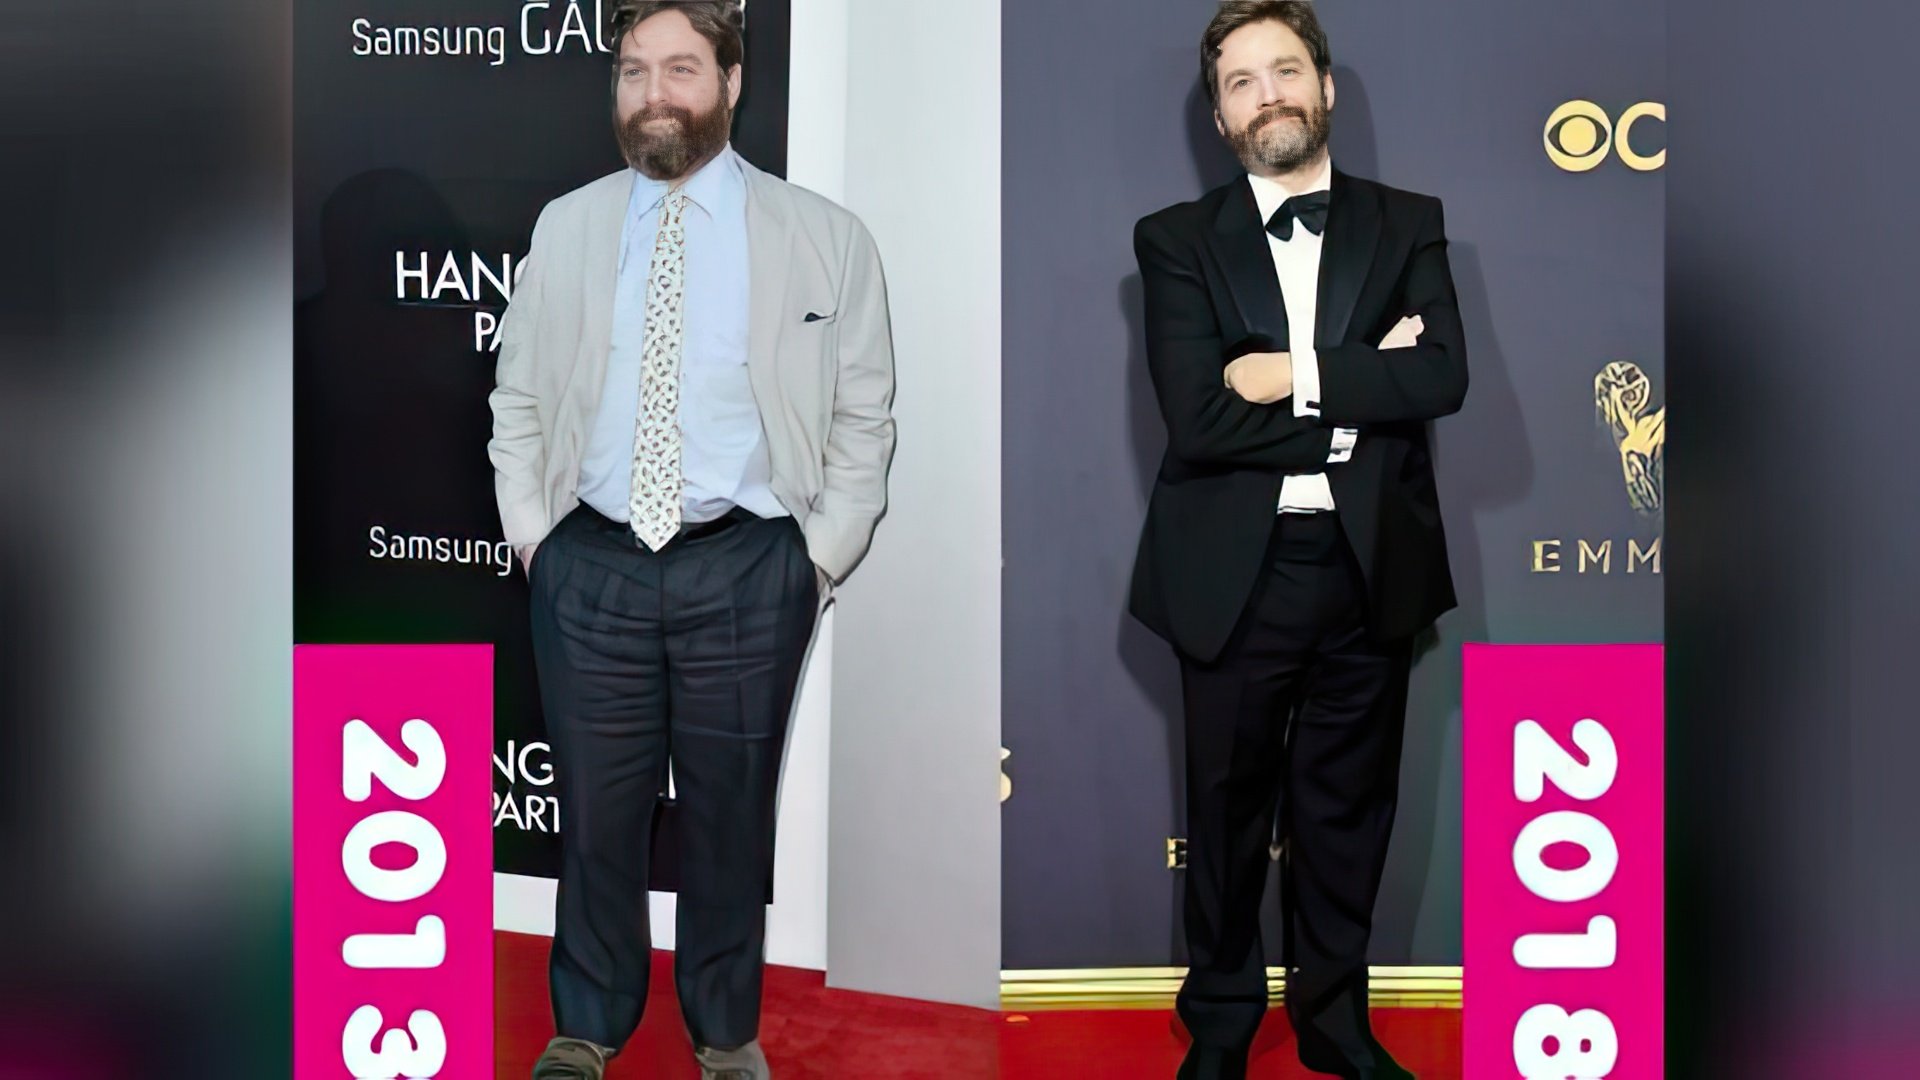 Zach Galifianakis Lost Weight and Now He Looks Like a Completely Different Person